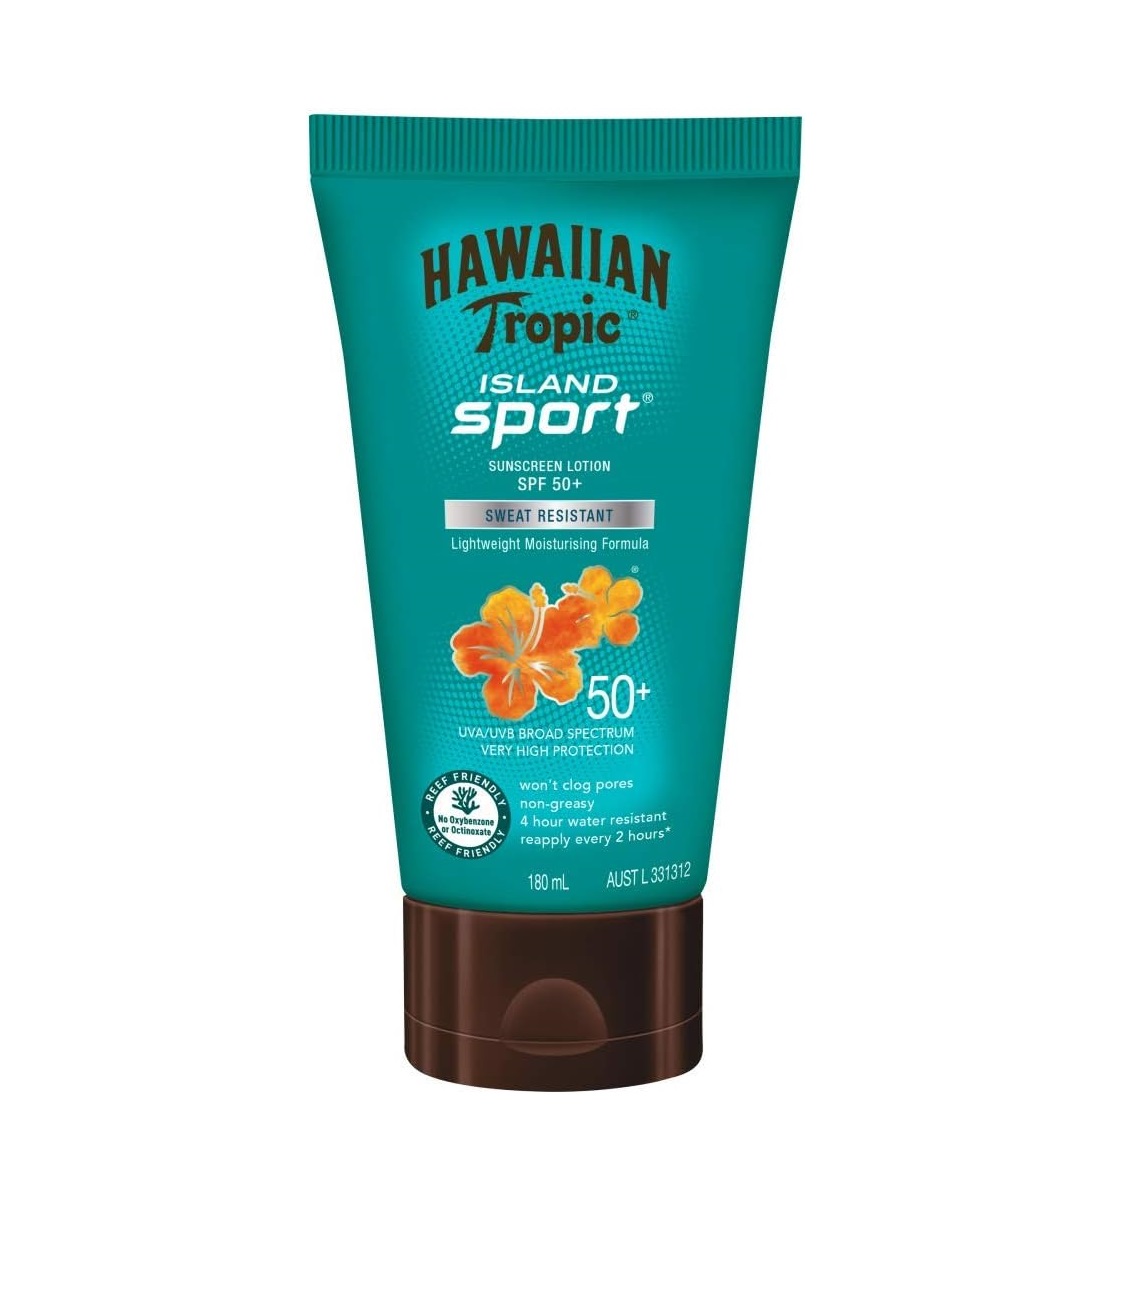 Hawaiian Tropic Island Sport Sunscreen Lotion SPF50+ 180ml, Sweat-resistant, 4-Hour Water Resistant, Non-greasy